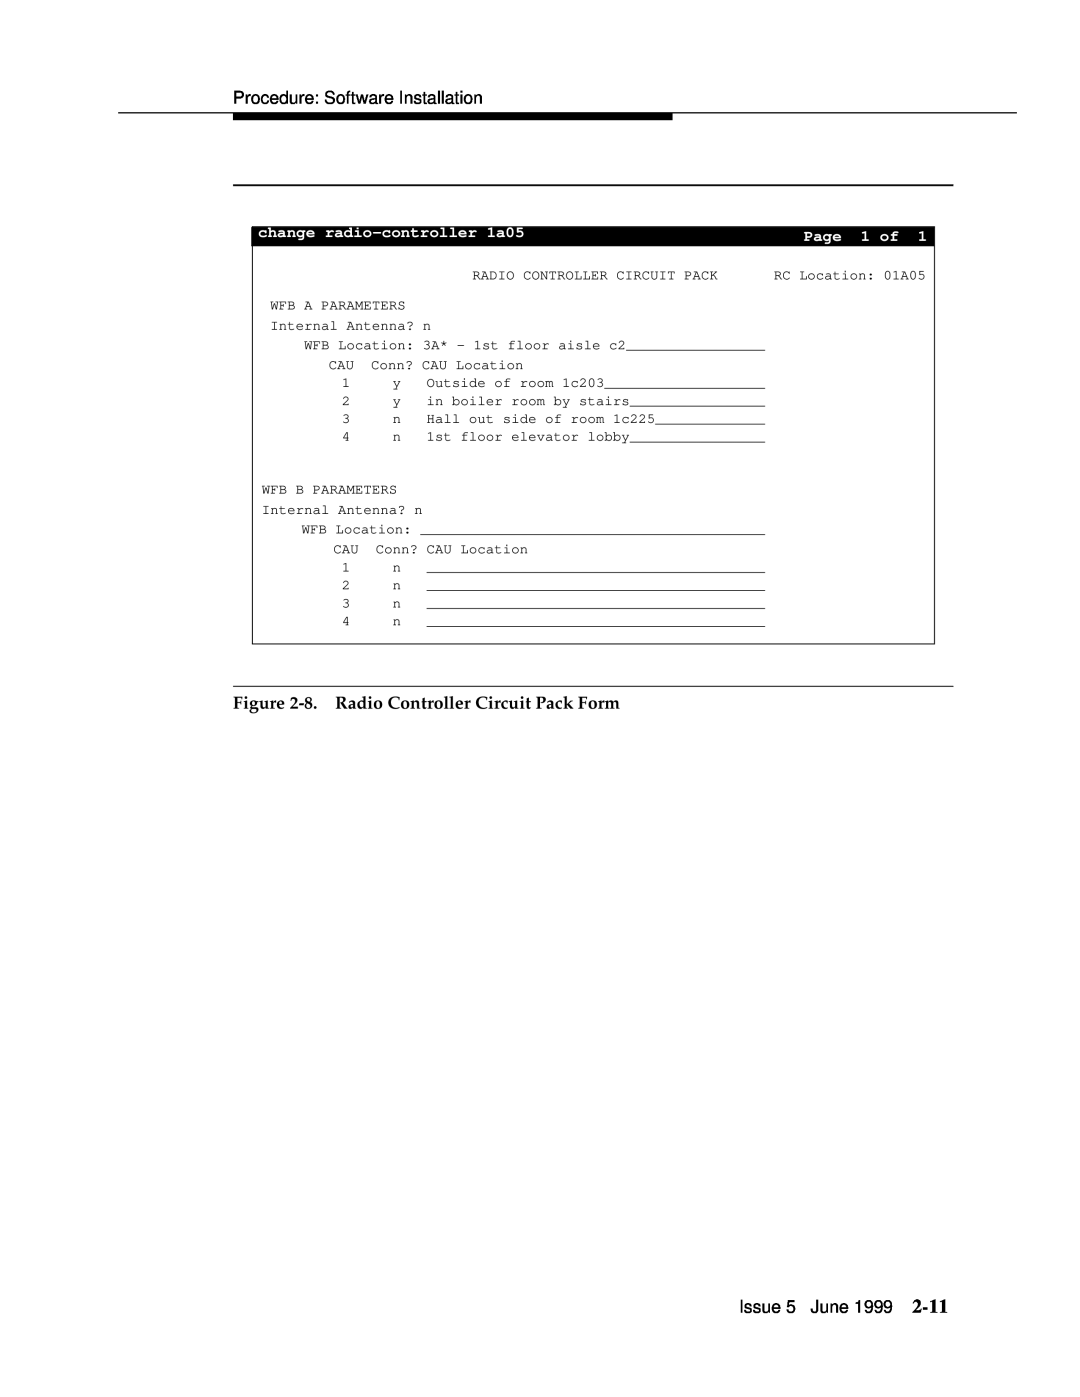 Lucent Technologies 555-232-102 manual 8. Radio Controller Circuit Pack Form, change radio-controller 1a05, Page 1 of 